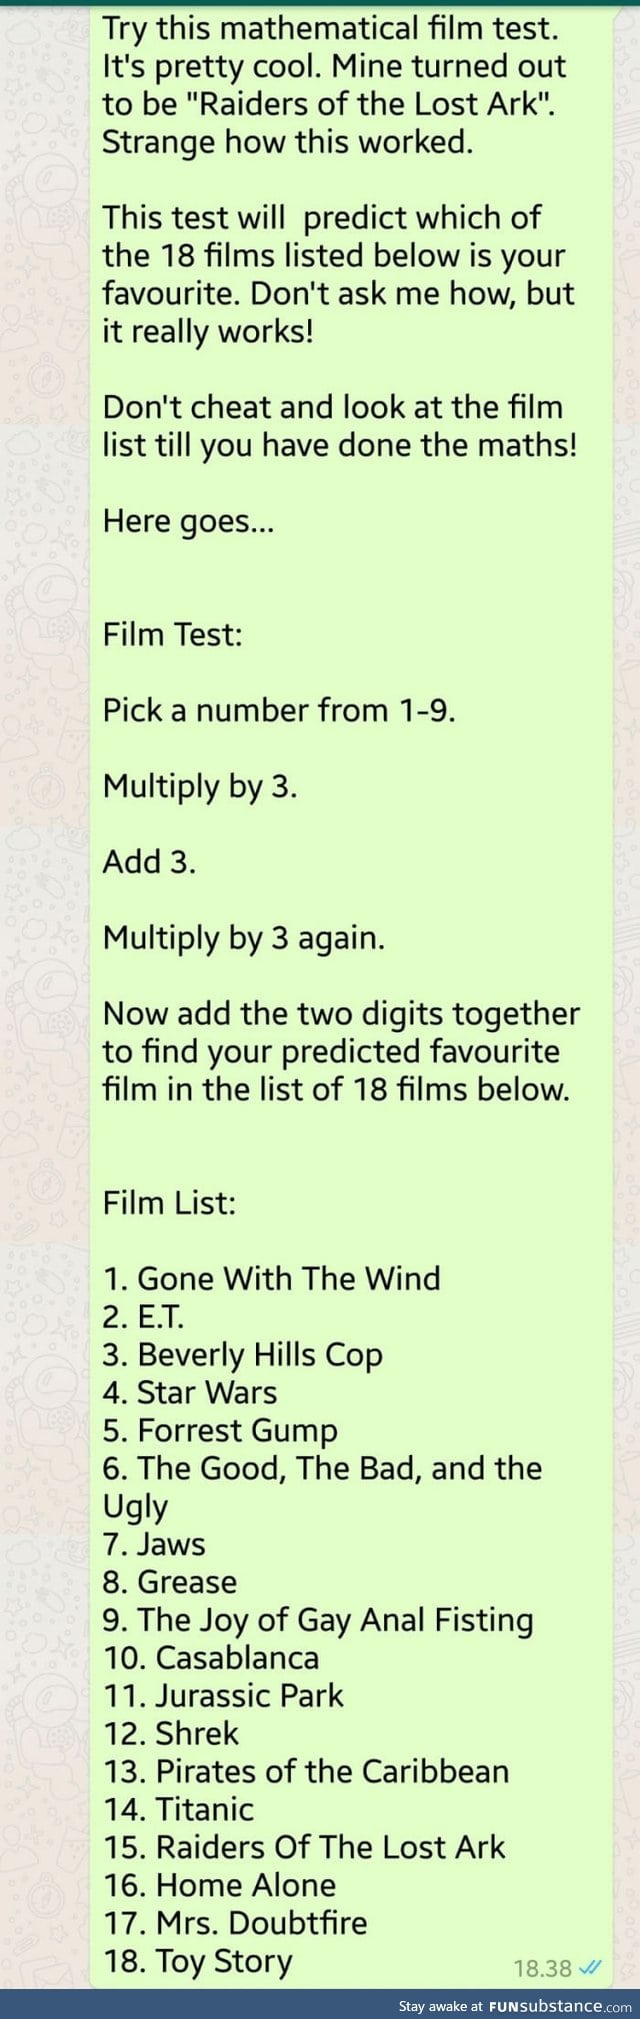 Try this mathematical film test. It's pretty cool